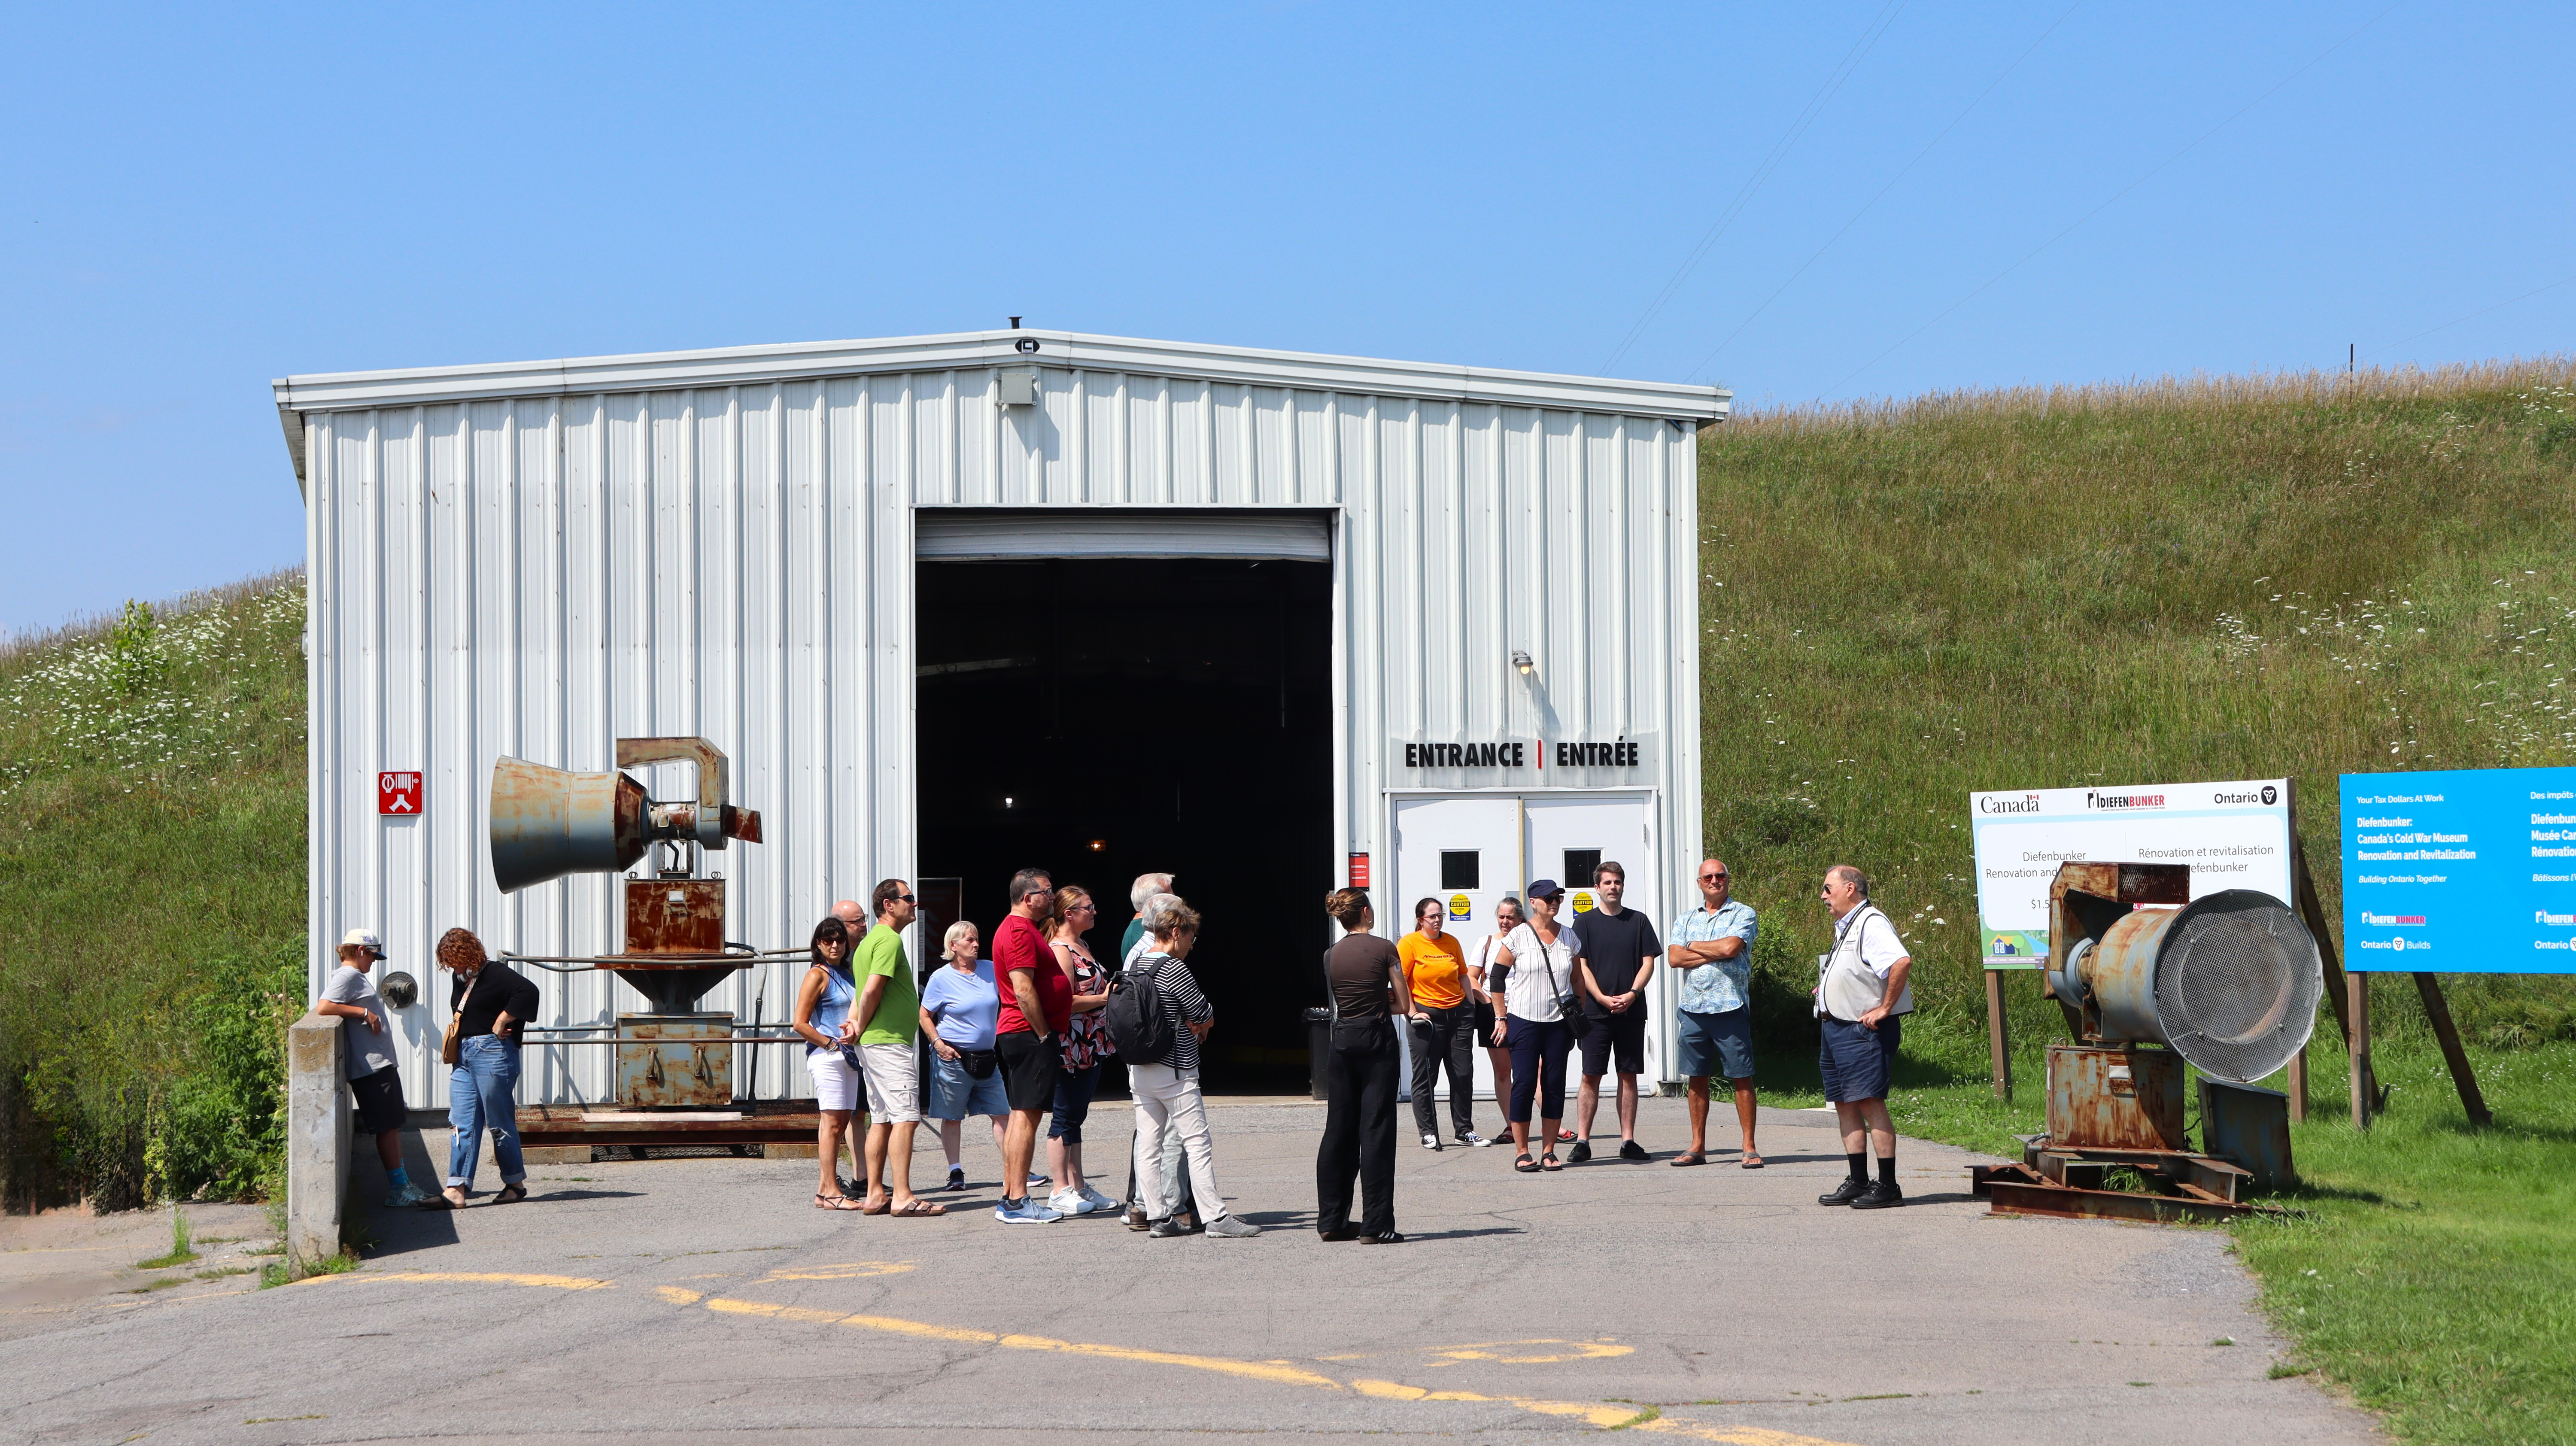 A group of visitors engages with a museum tour guide in front of a white garage-style building that is tucked into a grassy hillside.